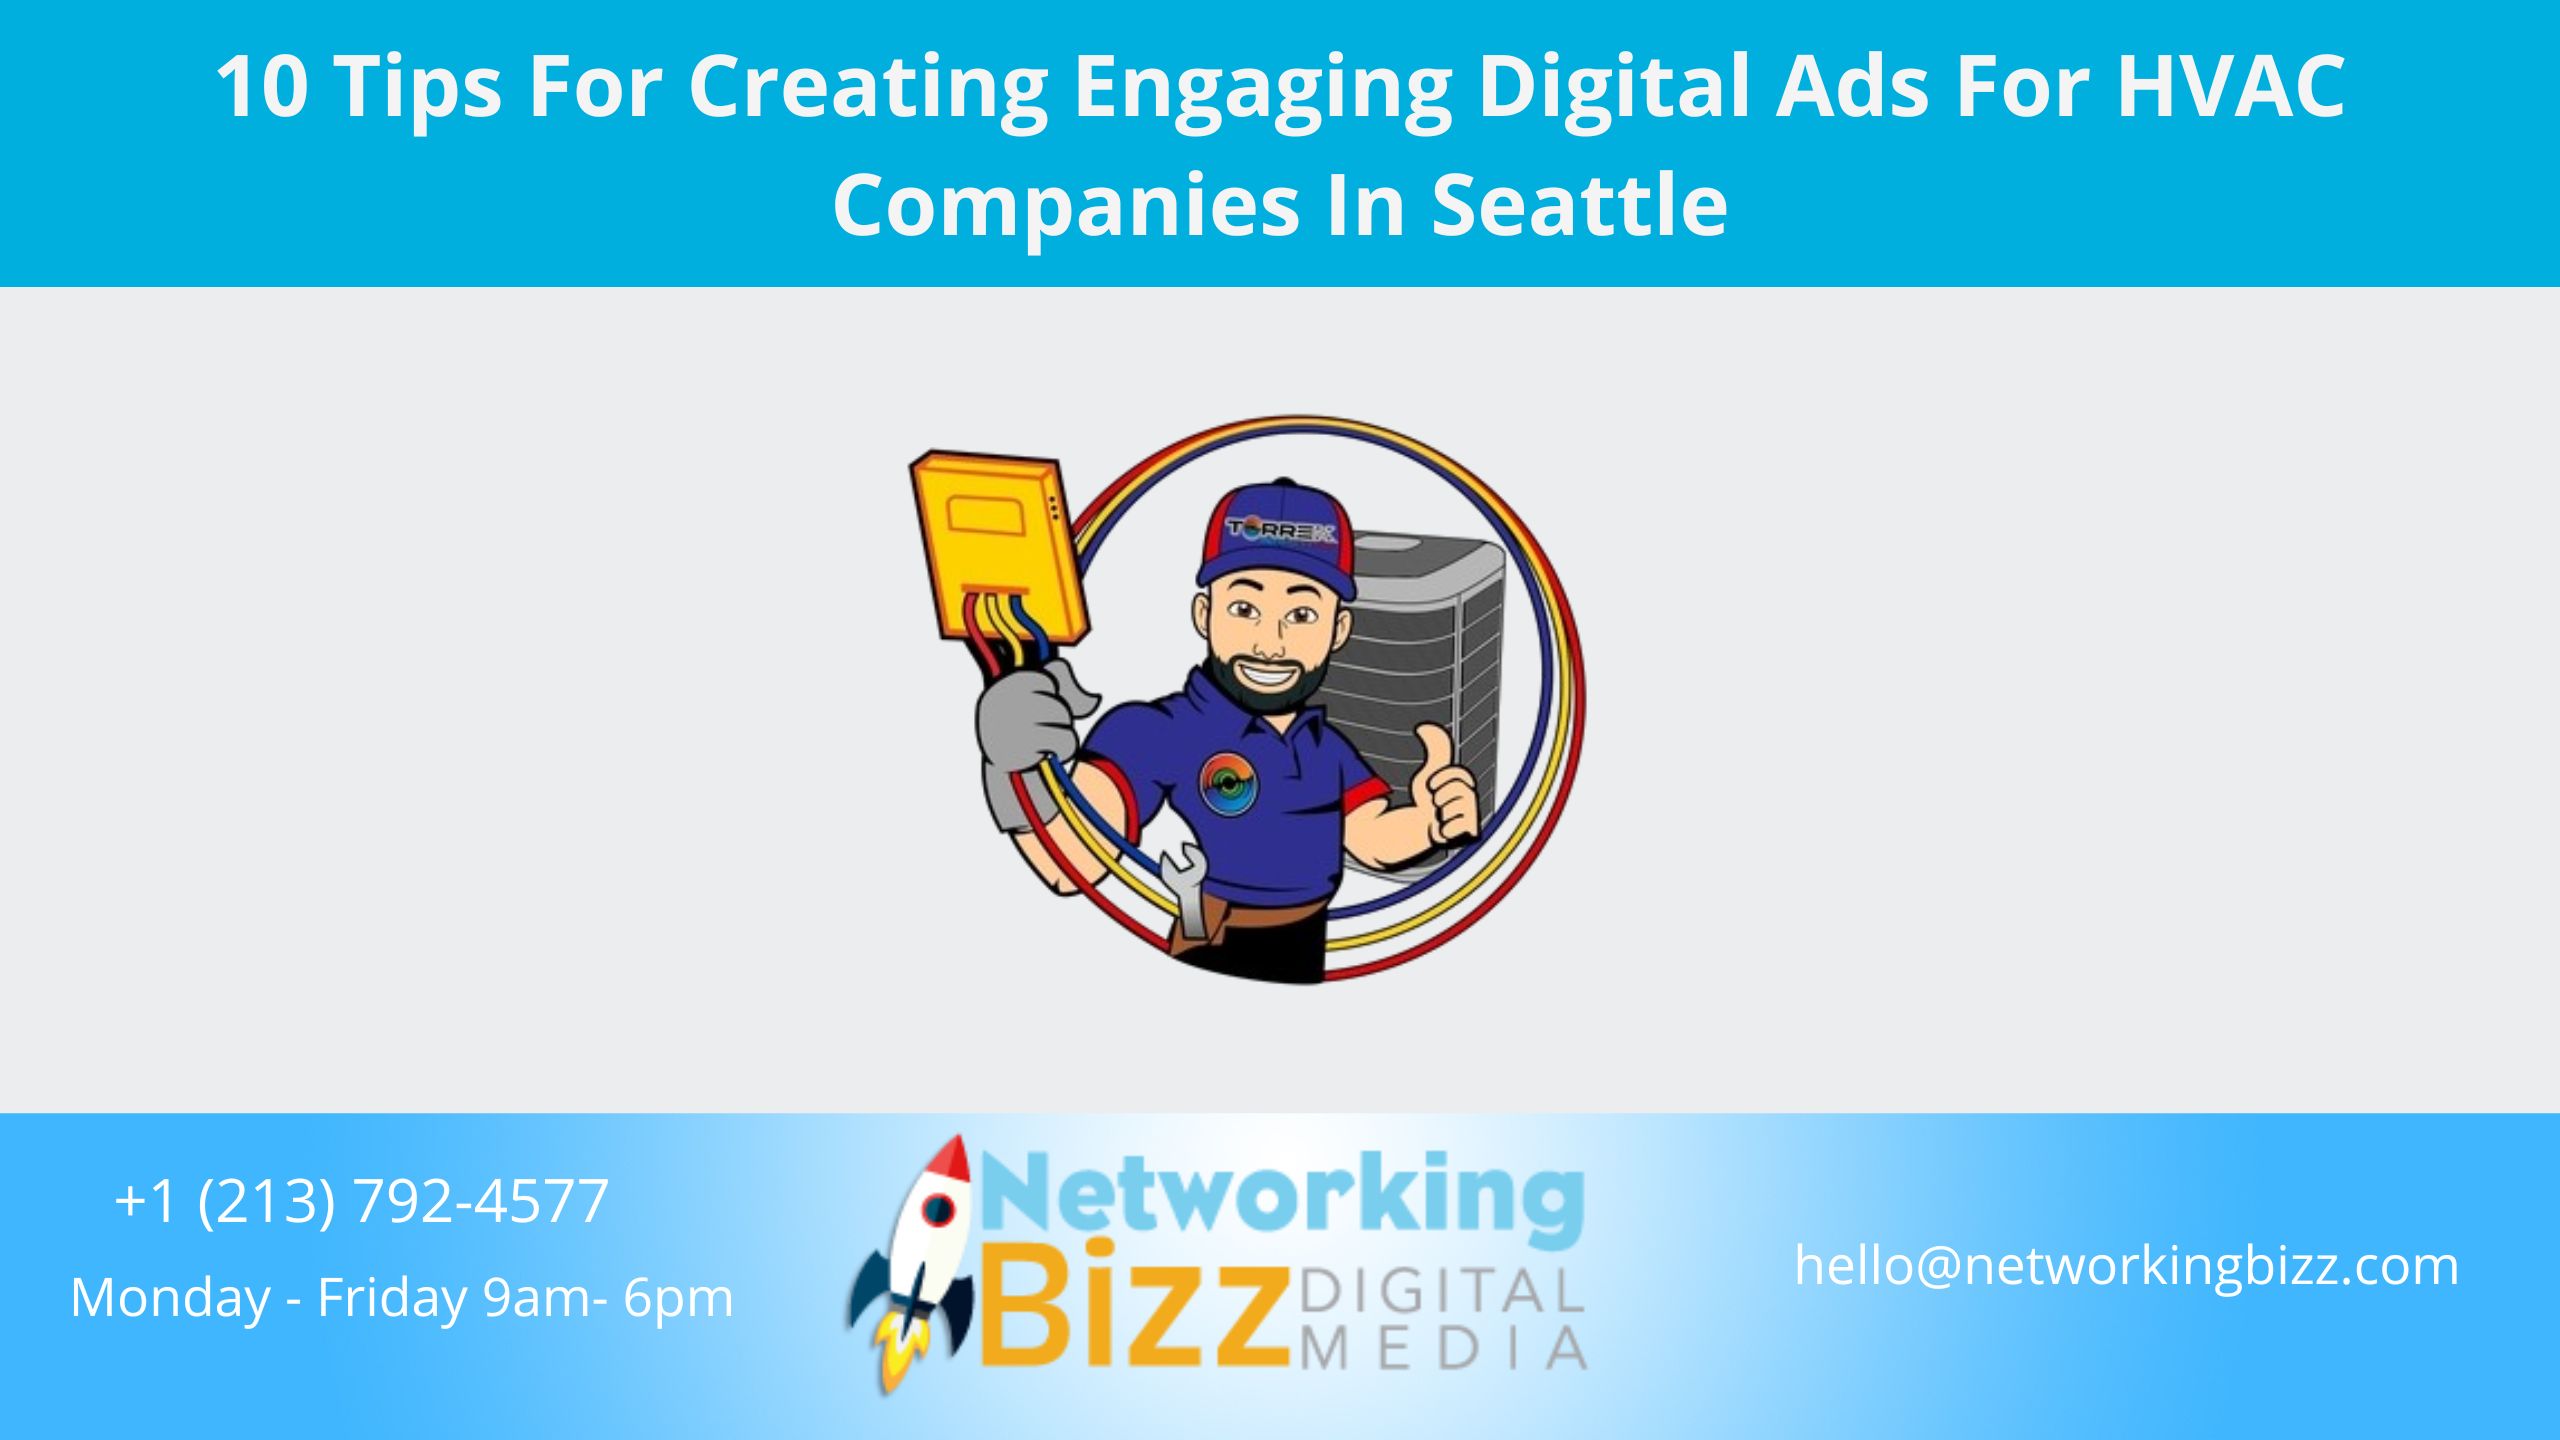 10 Tips For Creating Engaging Digital Ads For HVAC Companies In Seattle  